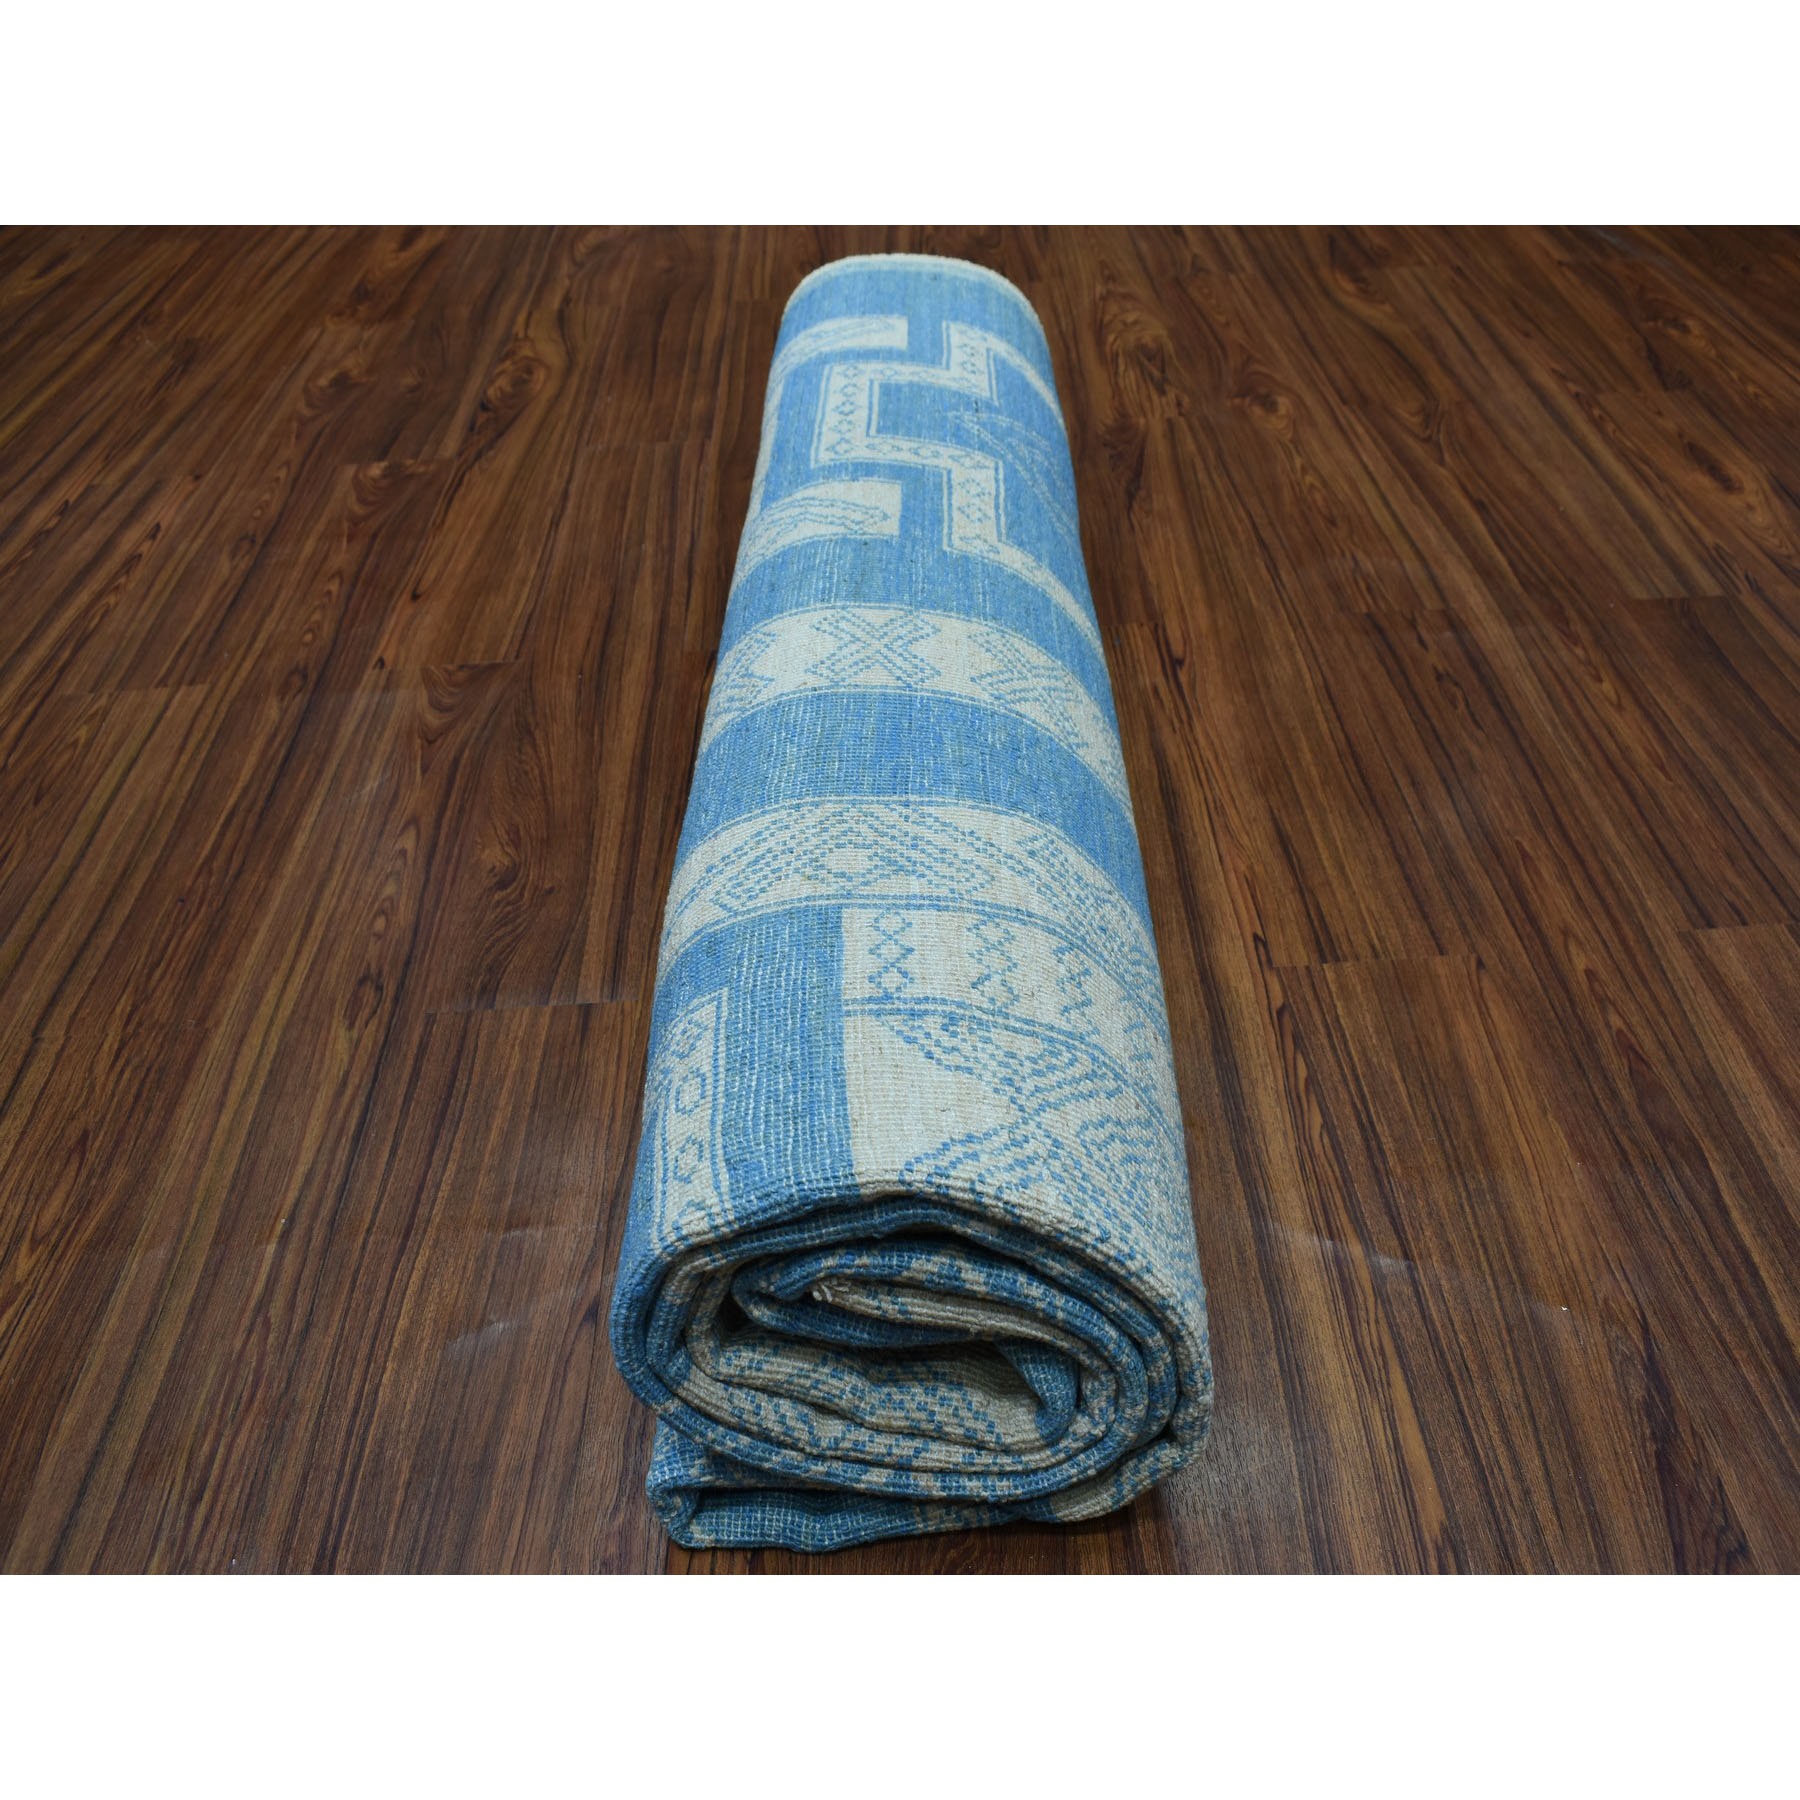 8-x10- Blue Hand Knotted Pure Wool Peshawar with Southwestern Motifs Oriental Rug 